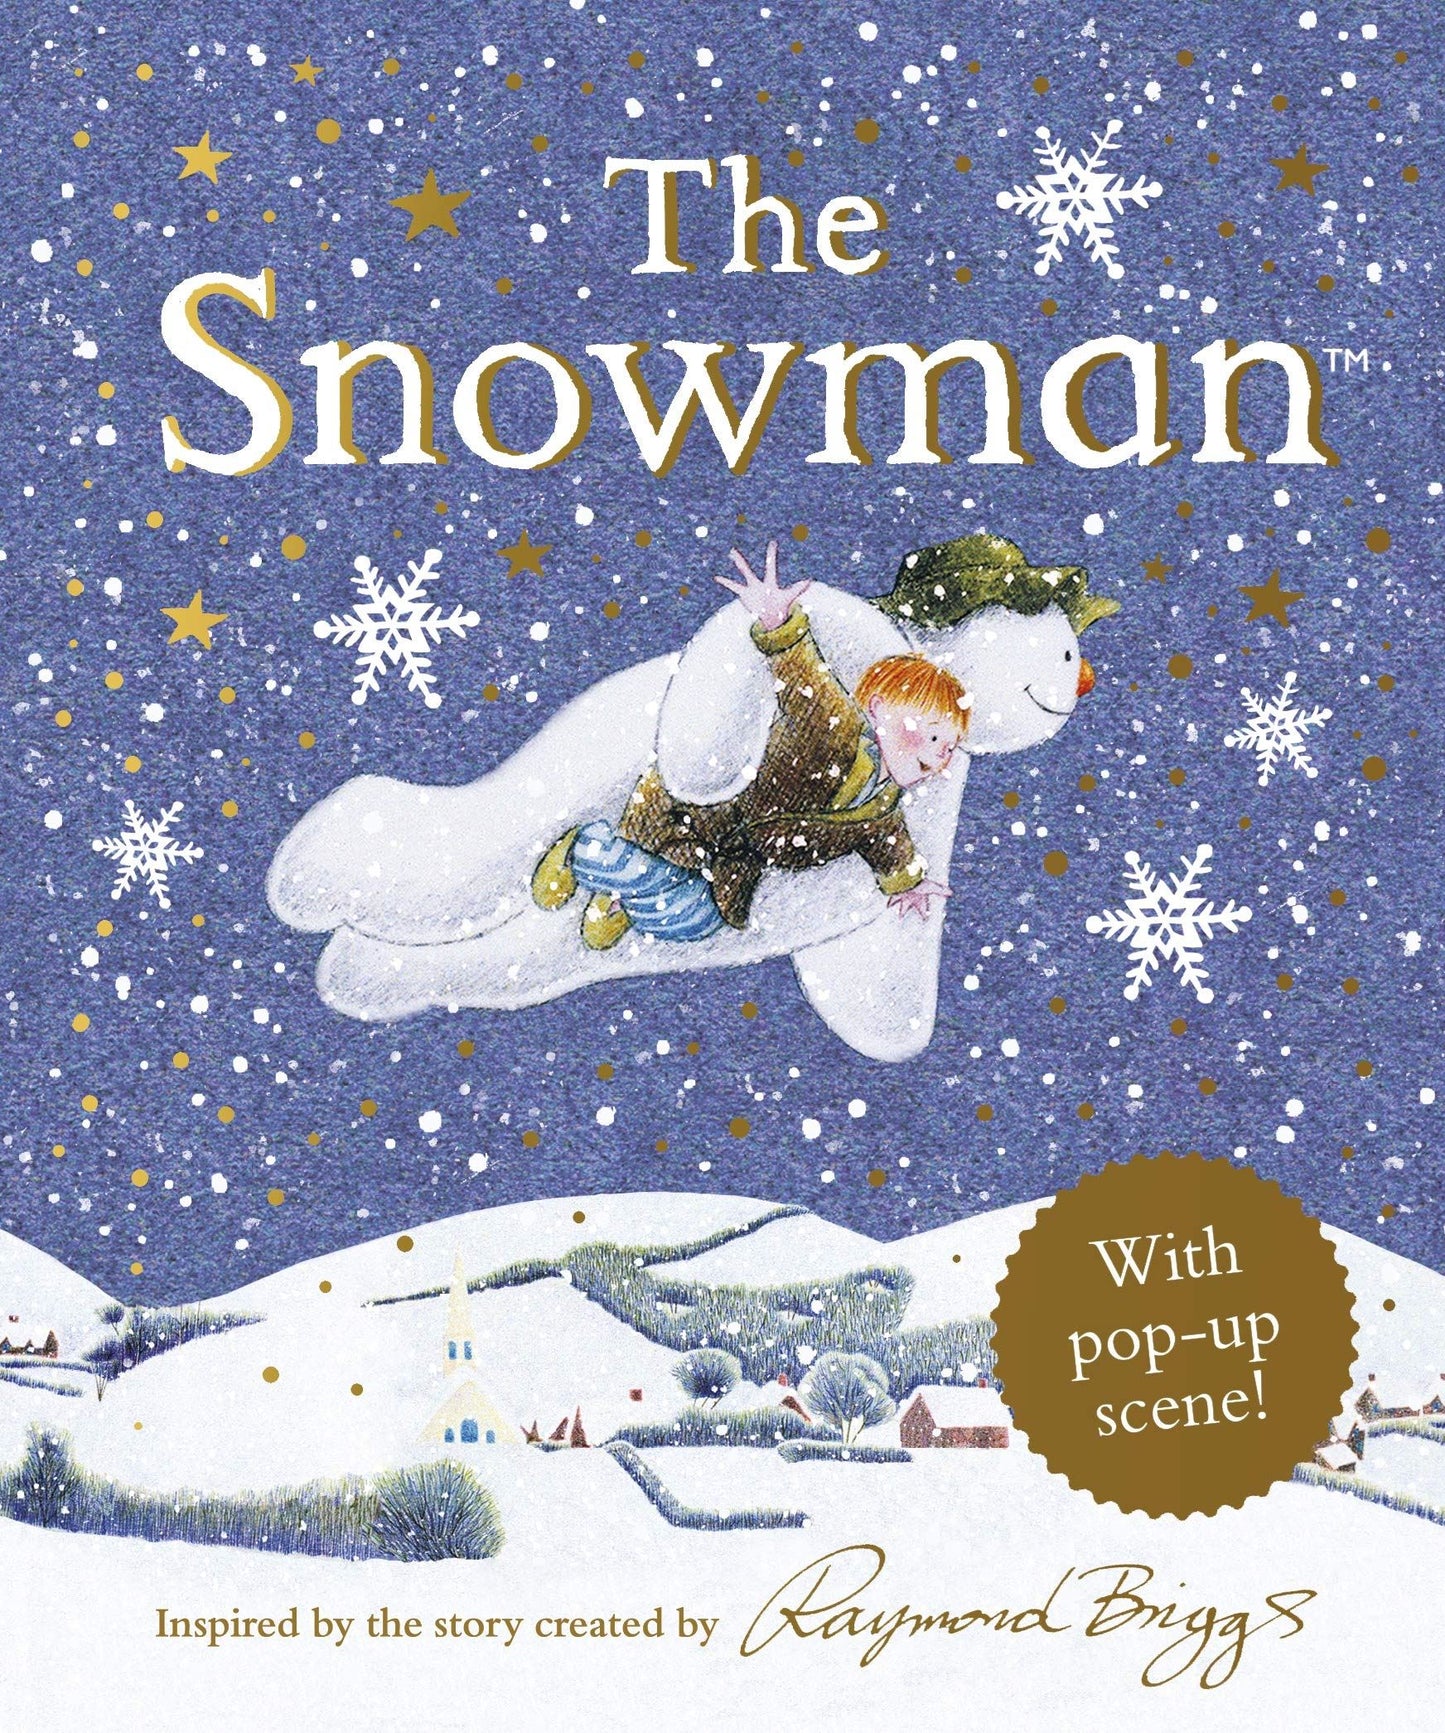 The Snowman, with Pop-up scene